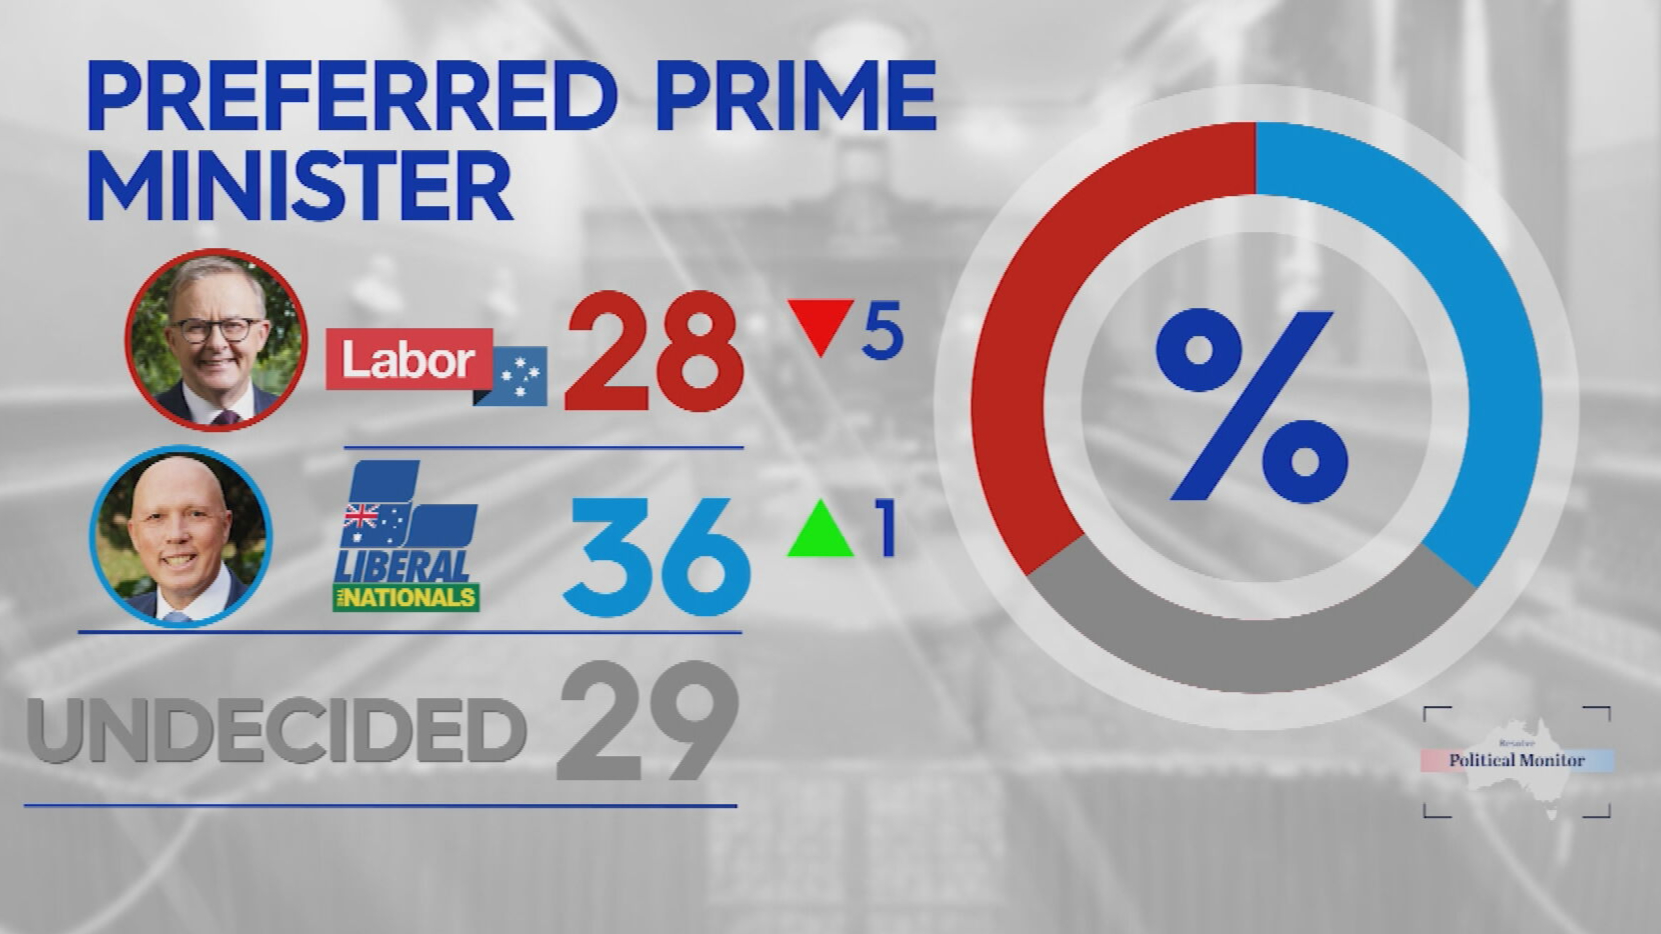 New poll shows Opposition leader has taken the lead as preferred Prime Minister